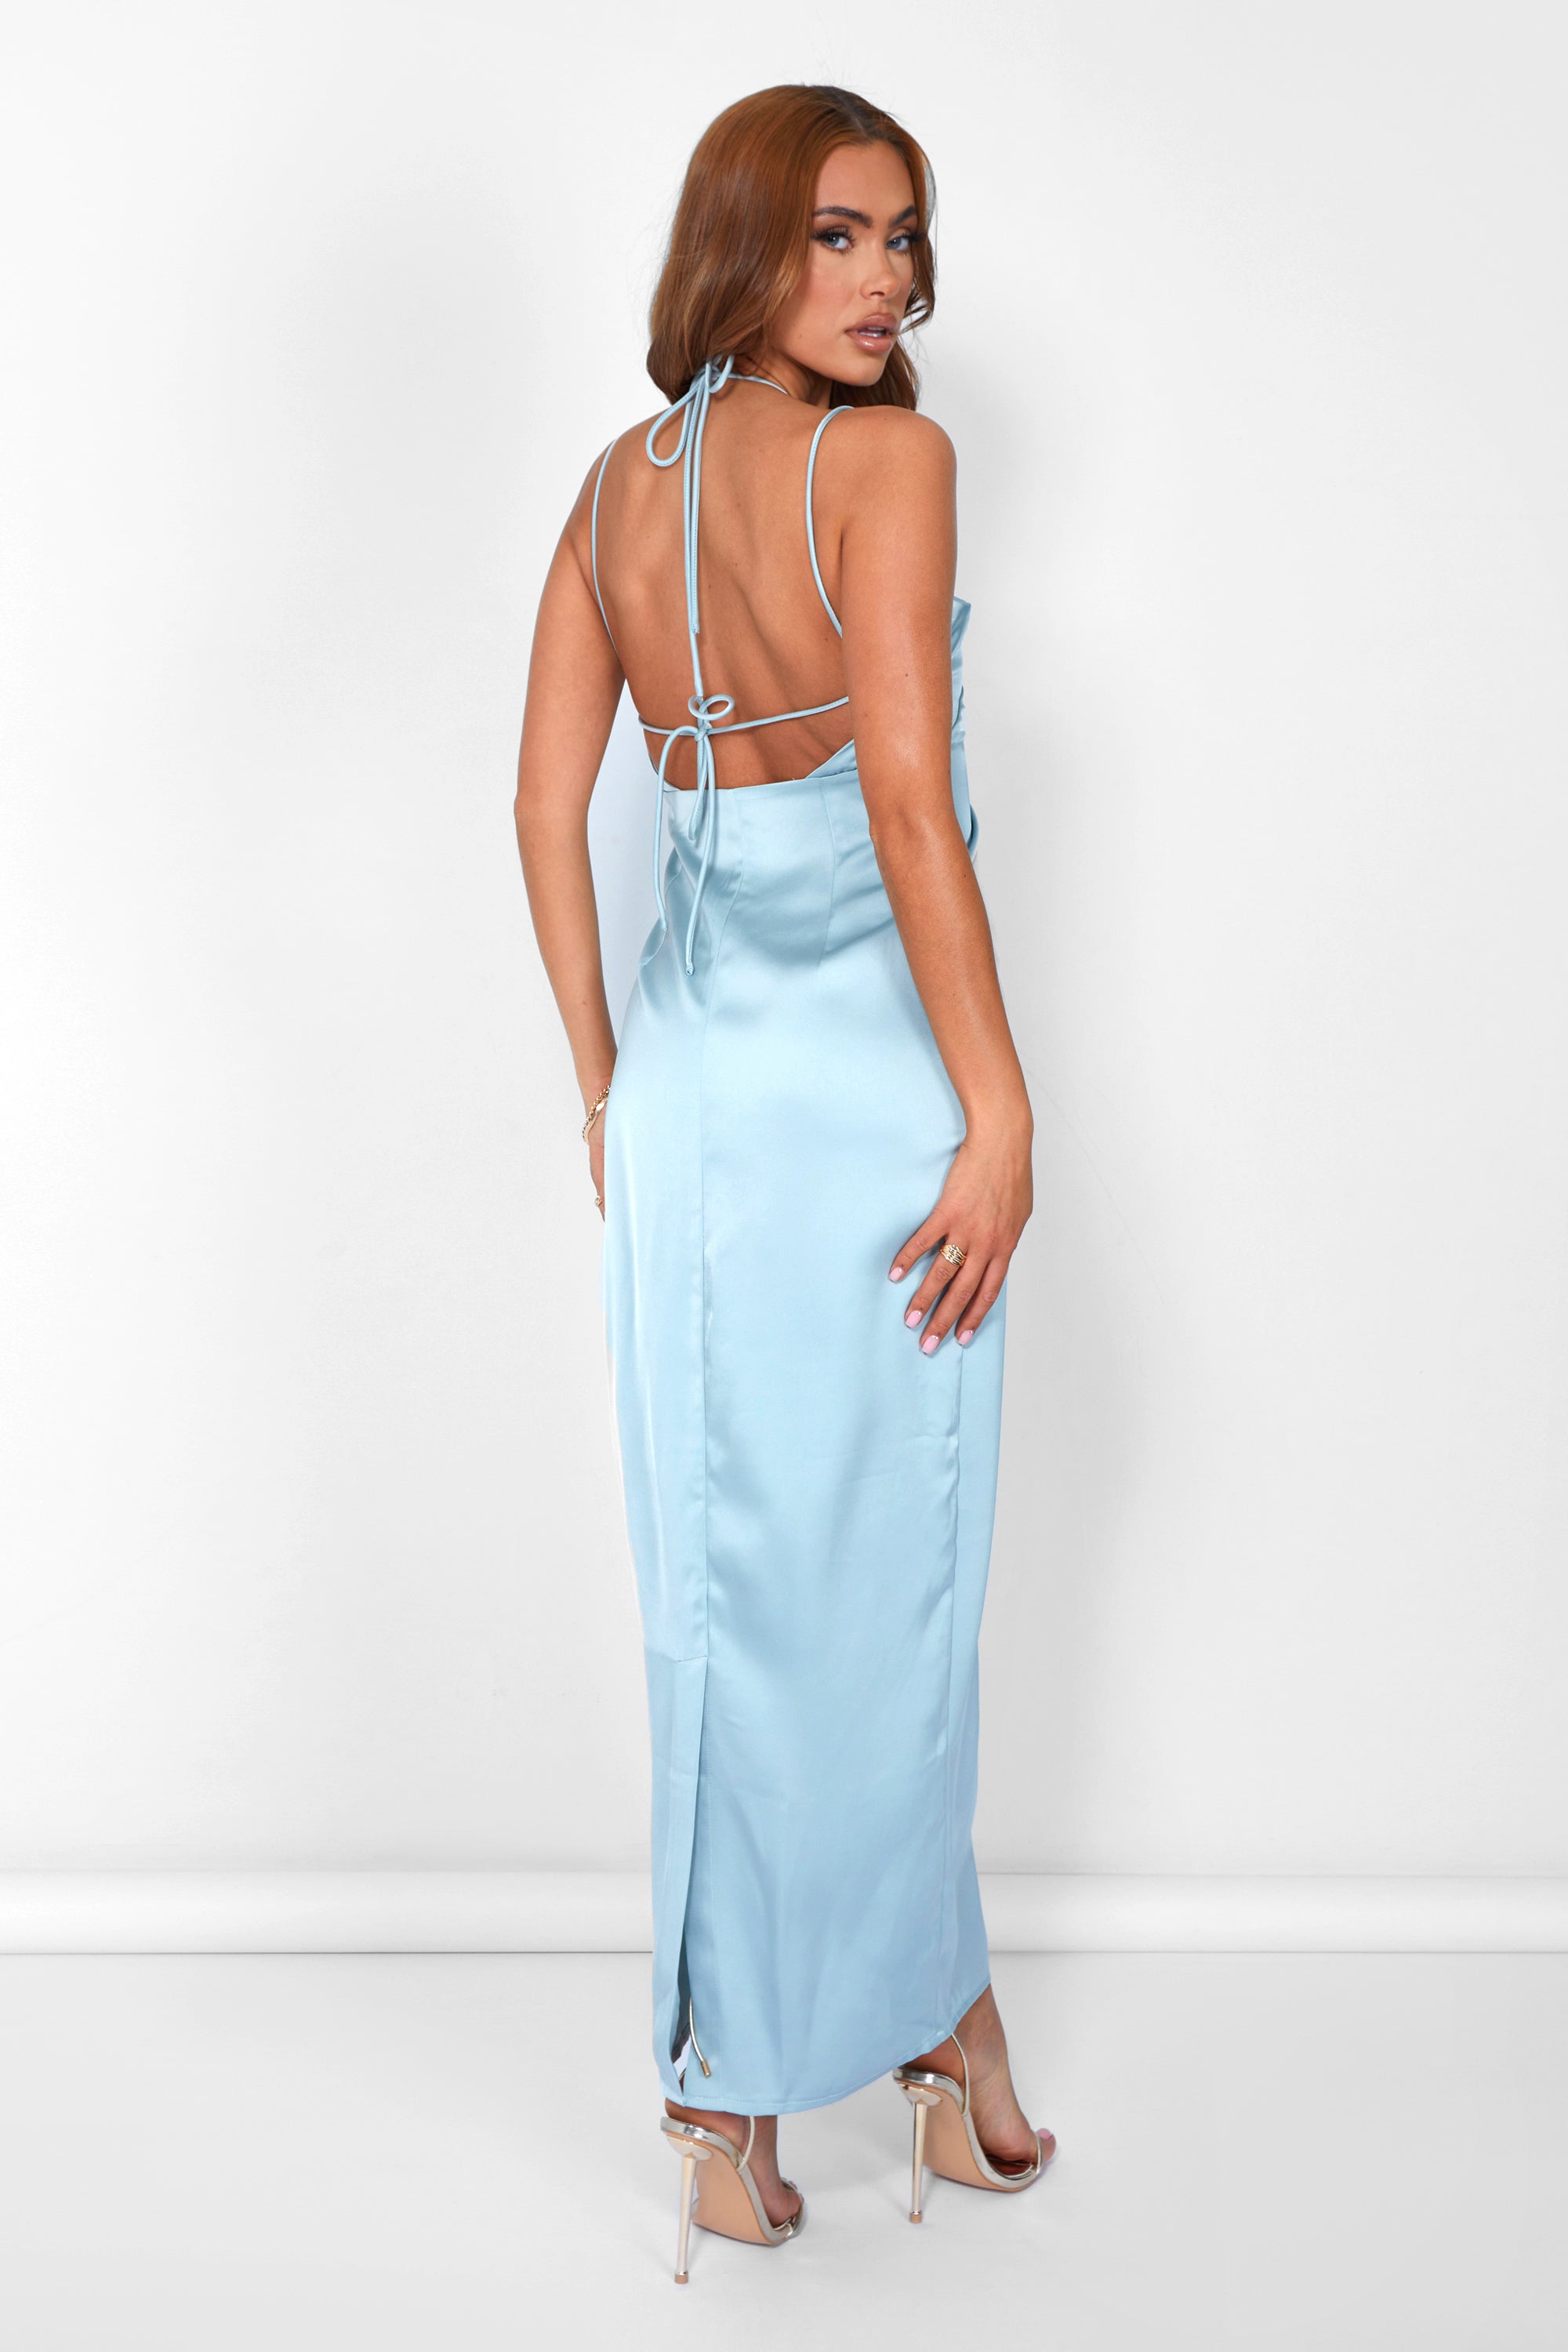 Satin Cut Out Strappy Maxi Dress Blue